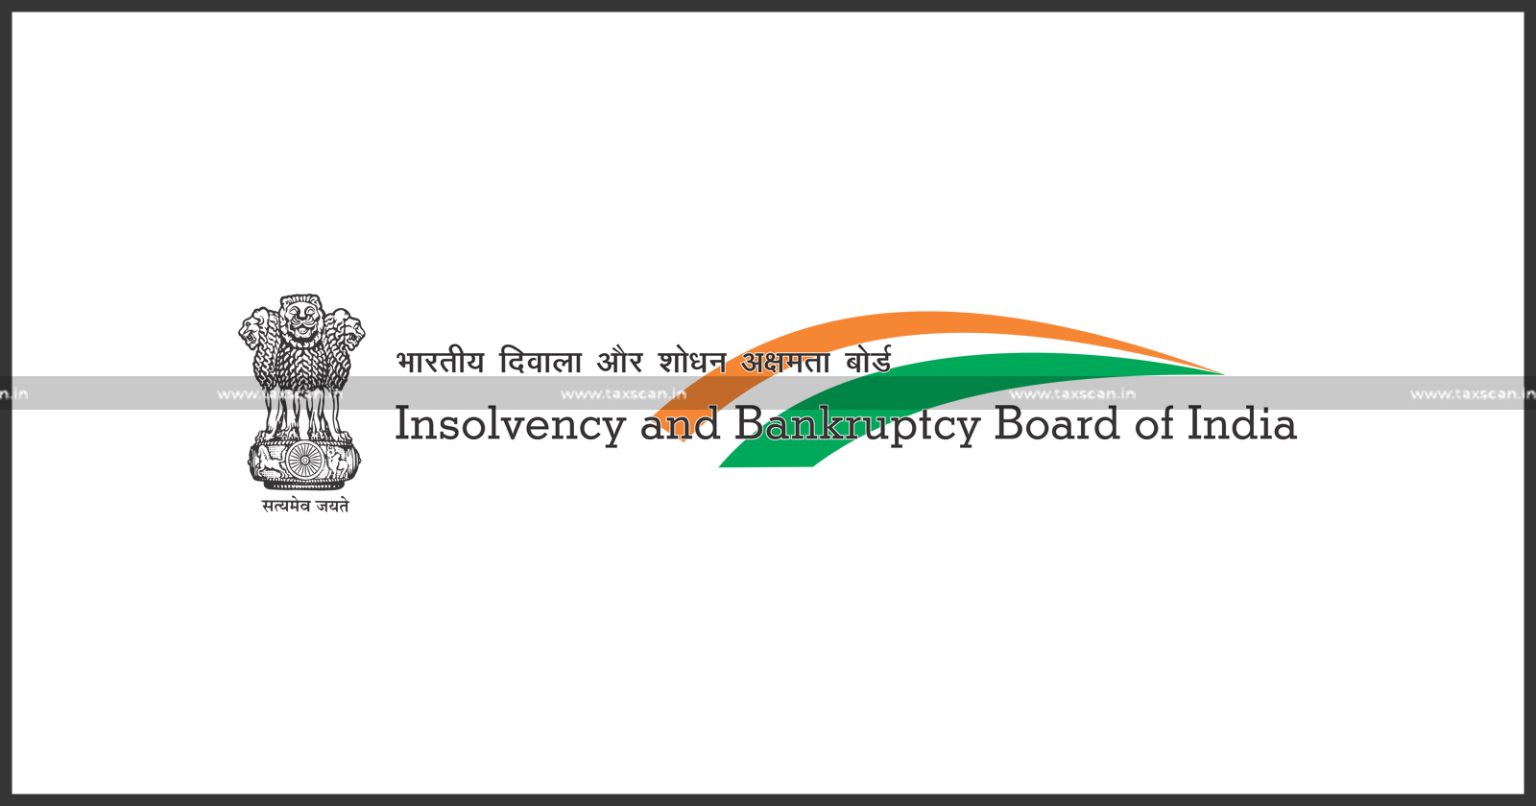 IBBI - IBC - Insolvency and Bankruptcy Board of India - IBBI Directs RP - TAXSCAN